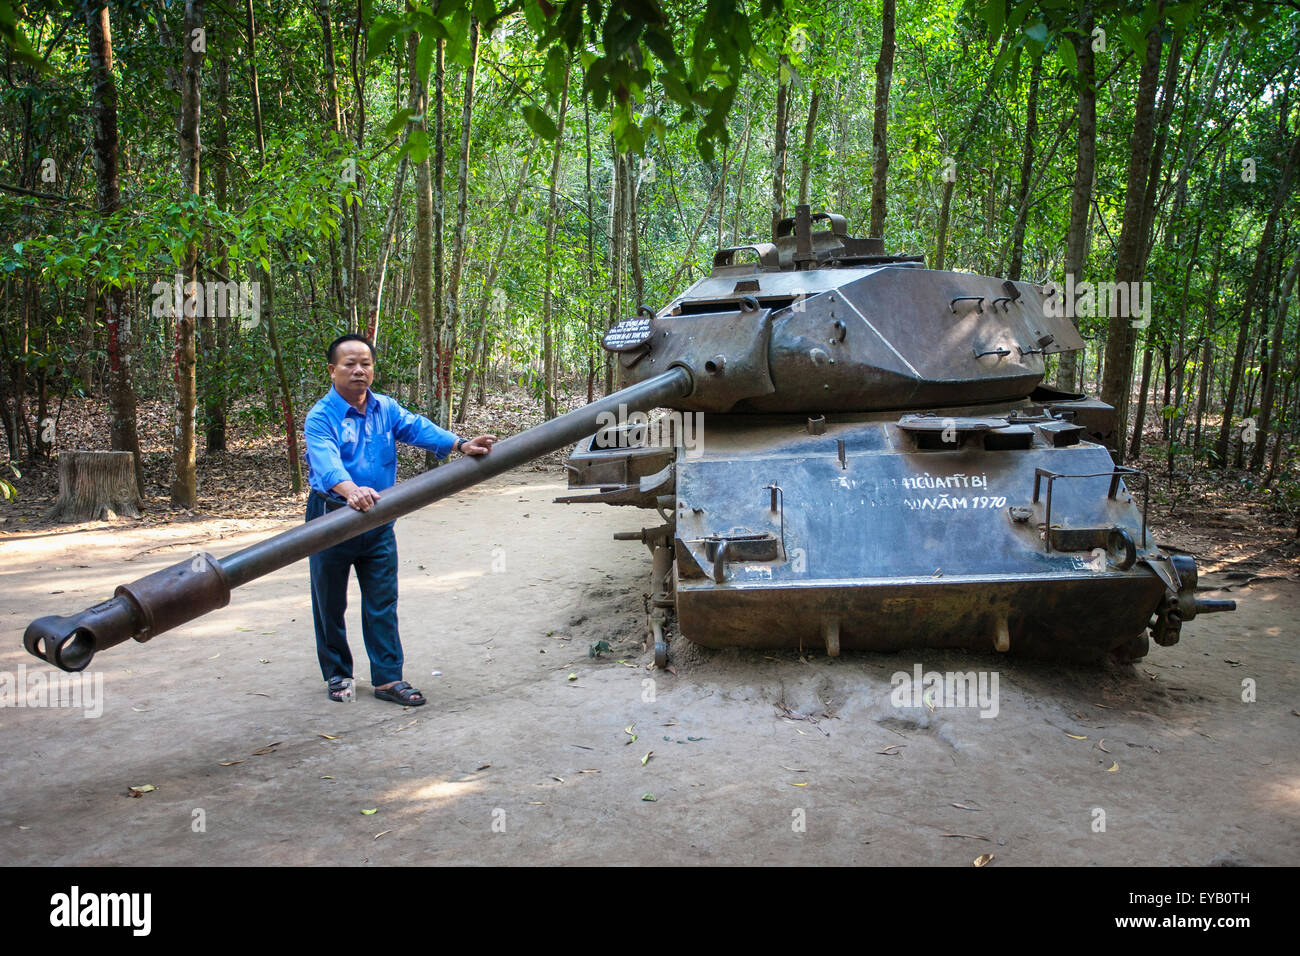 A Vietnamese man holds the barrel of a tank at the Cu Chi Tunnels in Vietnam Stock Photo